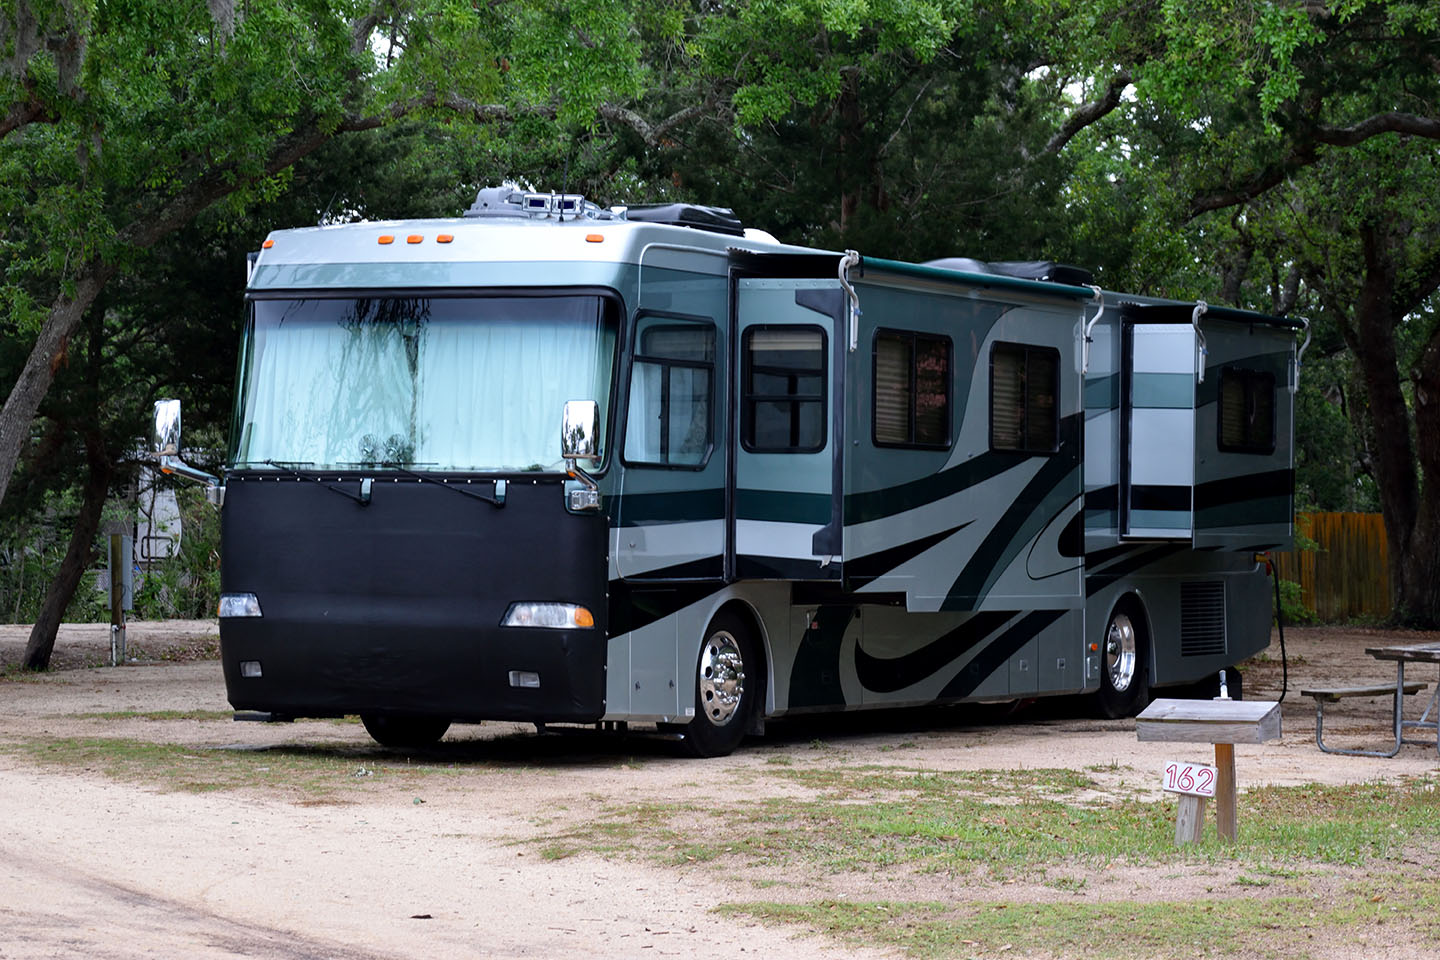 A motorhome with 2 slideouts deployed in a green campsite.